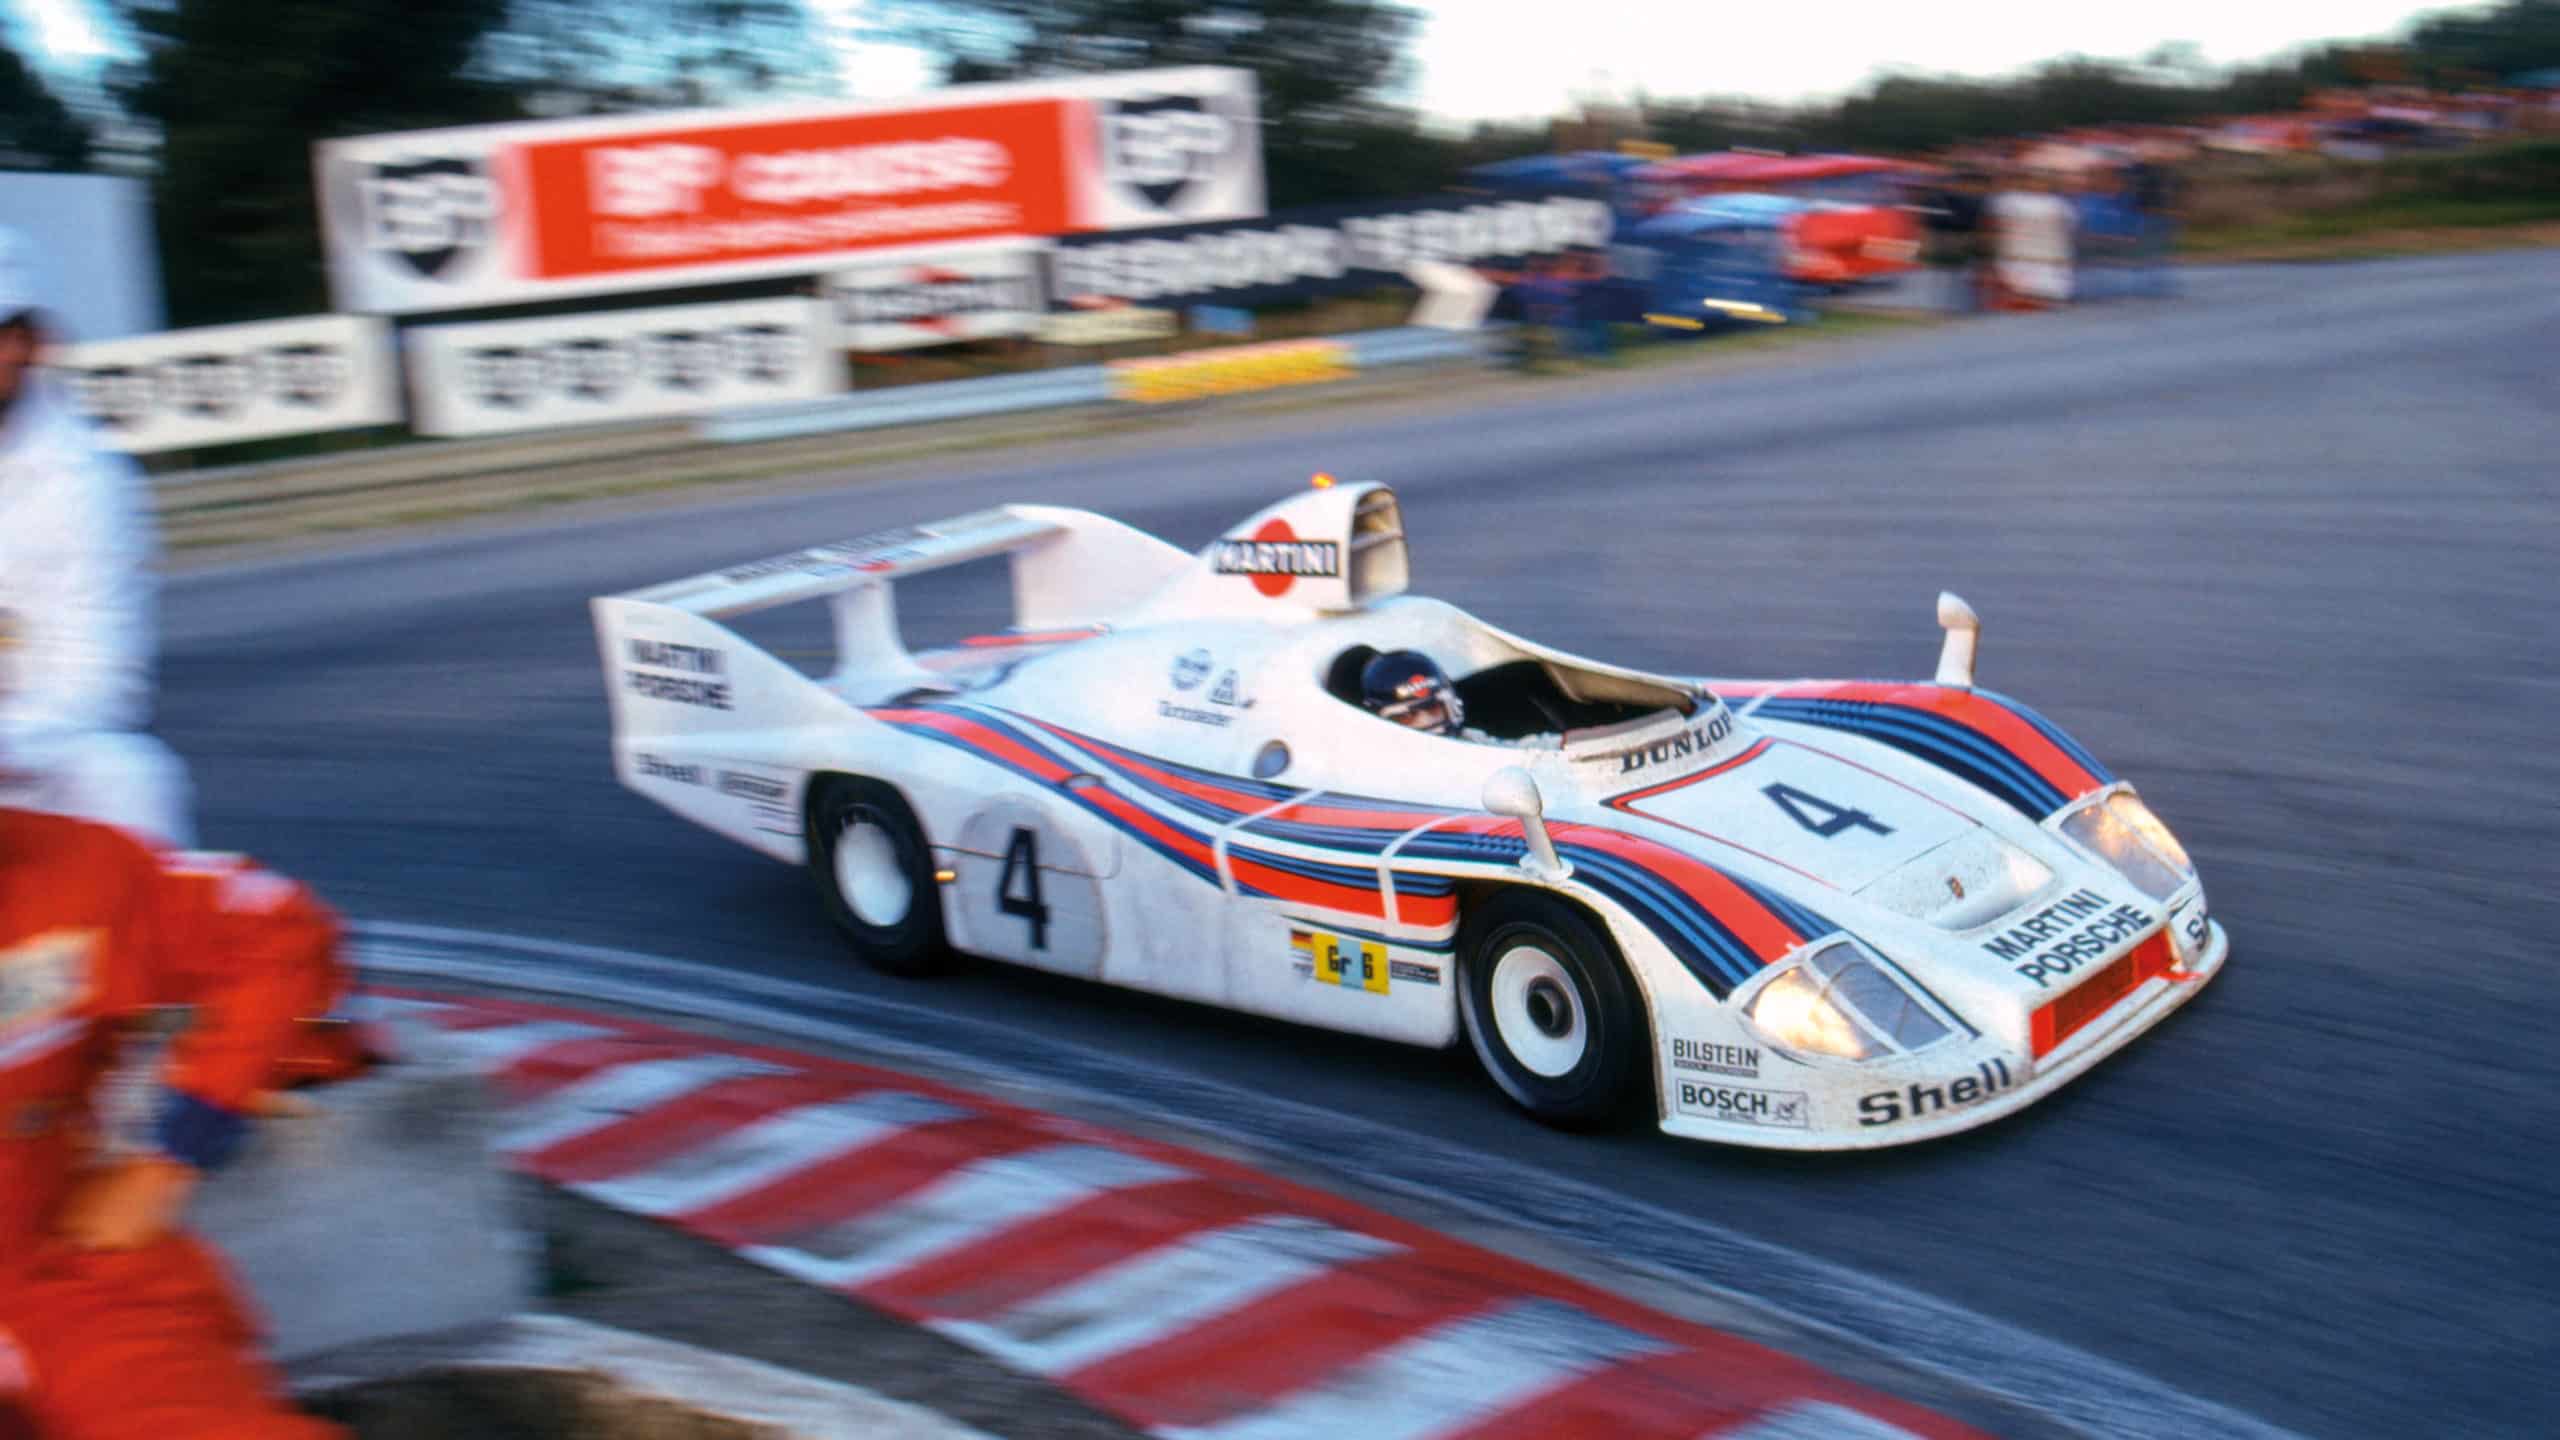 Jacky Ickx's in the Porsche at Le Mans 1977